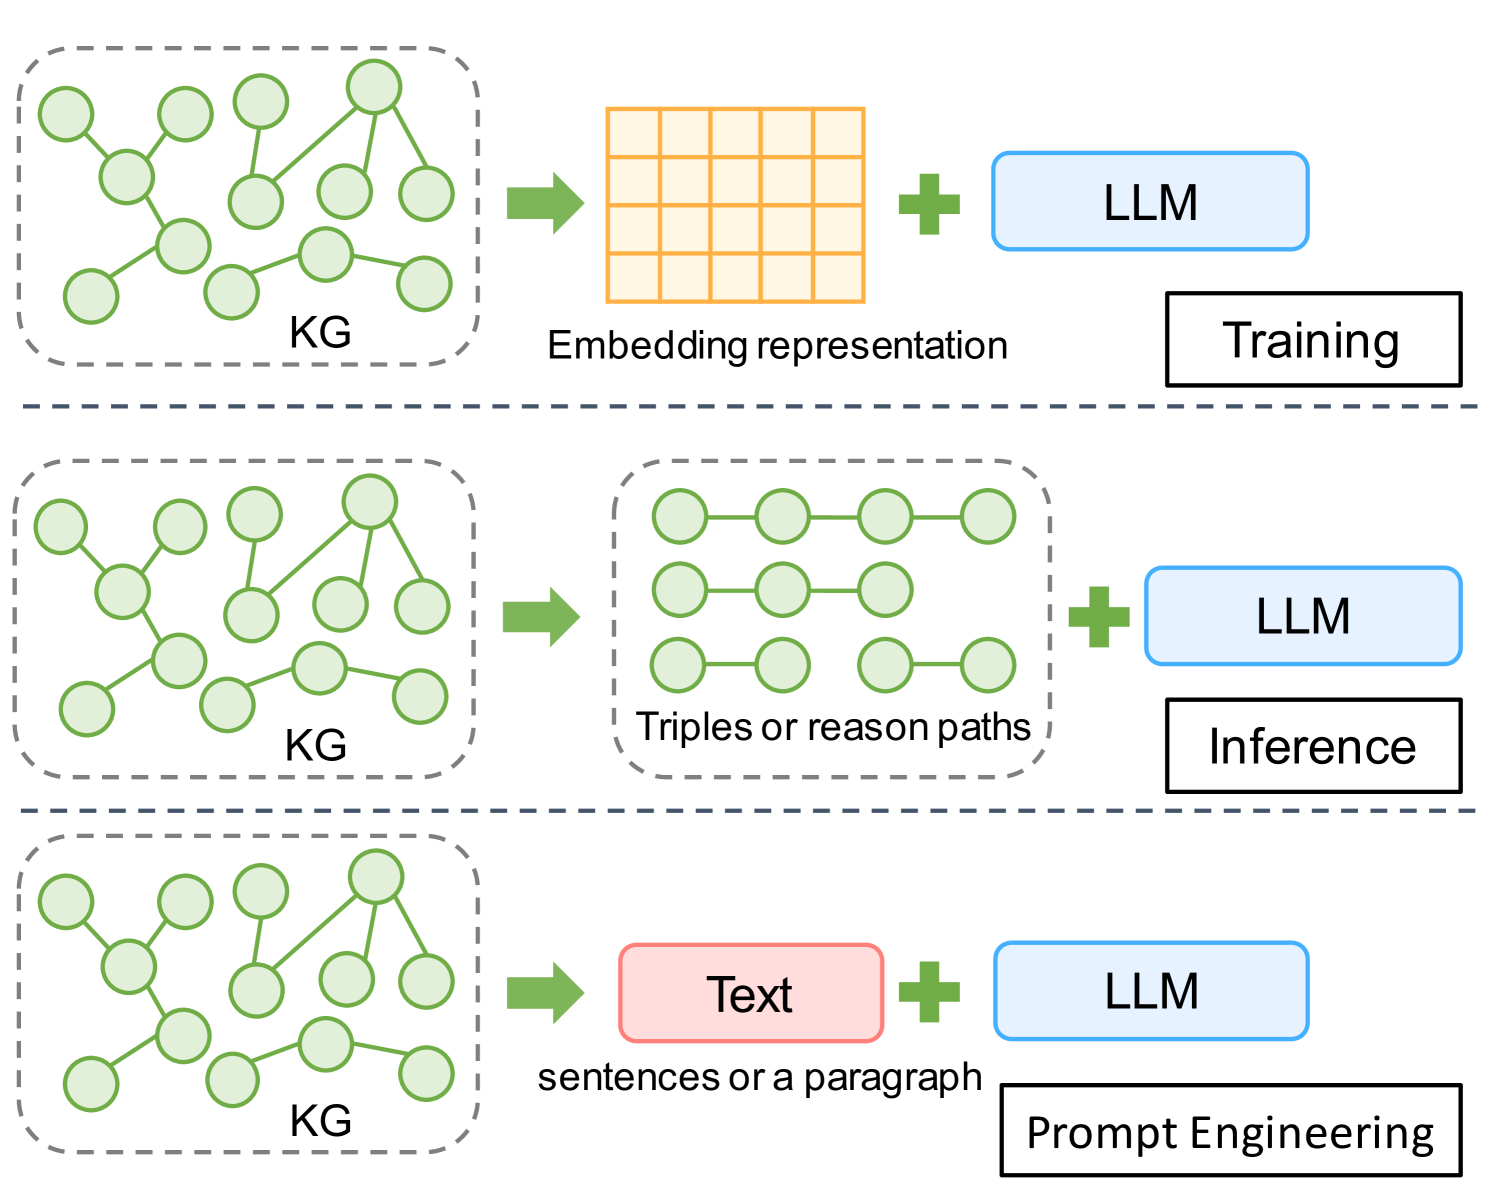 Counter-intuitive: Large Language Models Can Better Understand Knowledge Graphs Than We Thought